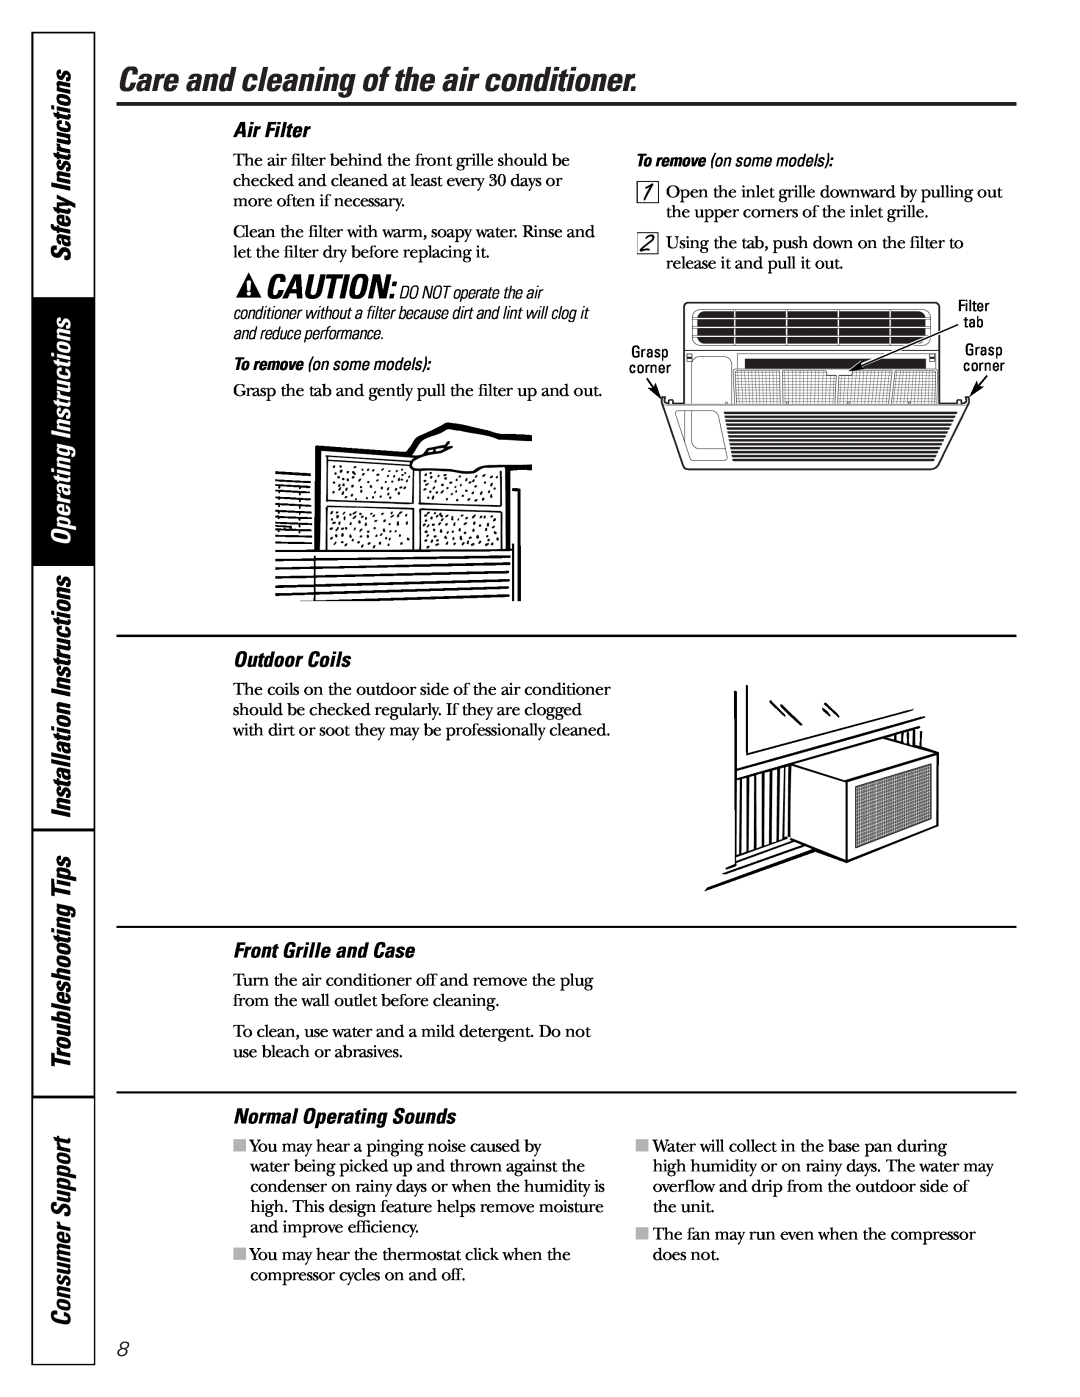 GE AGM05 owner manual Care and cleaning of the air conditioner, Air Filter, Normal Operating Sounds, Consumer Support 